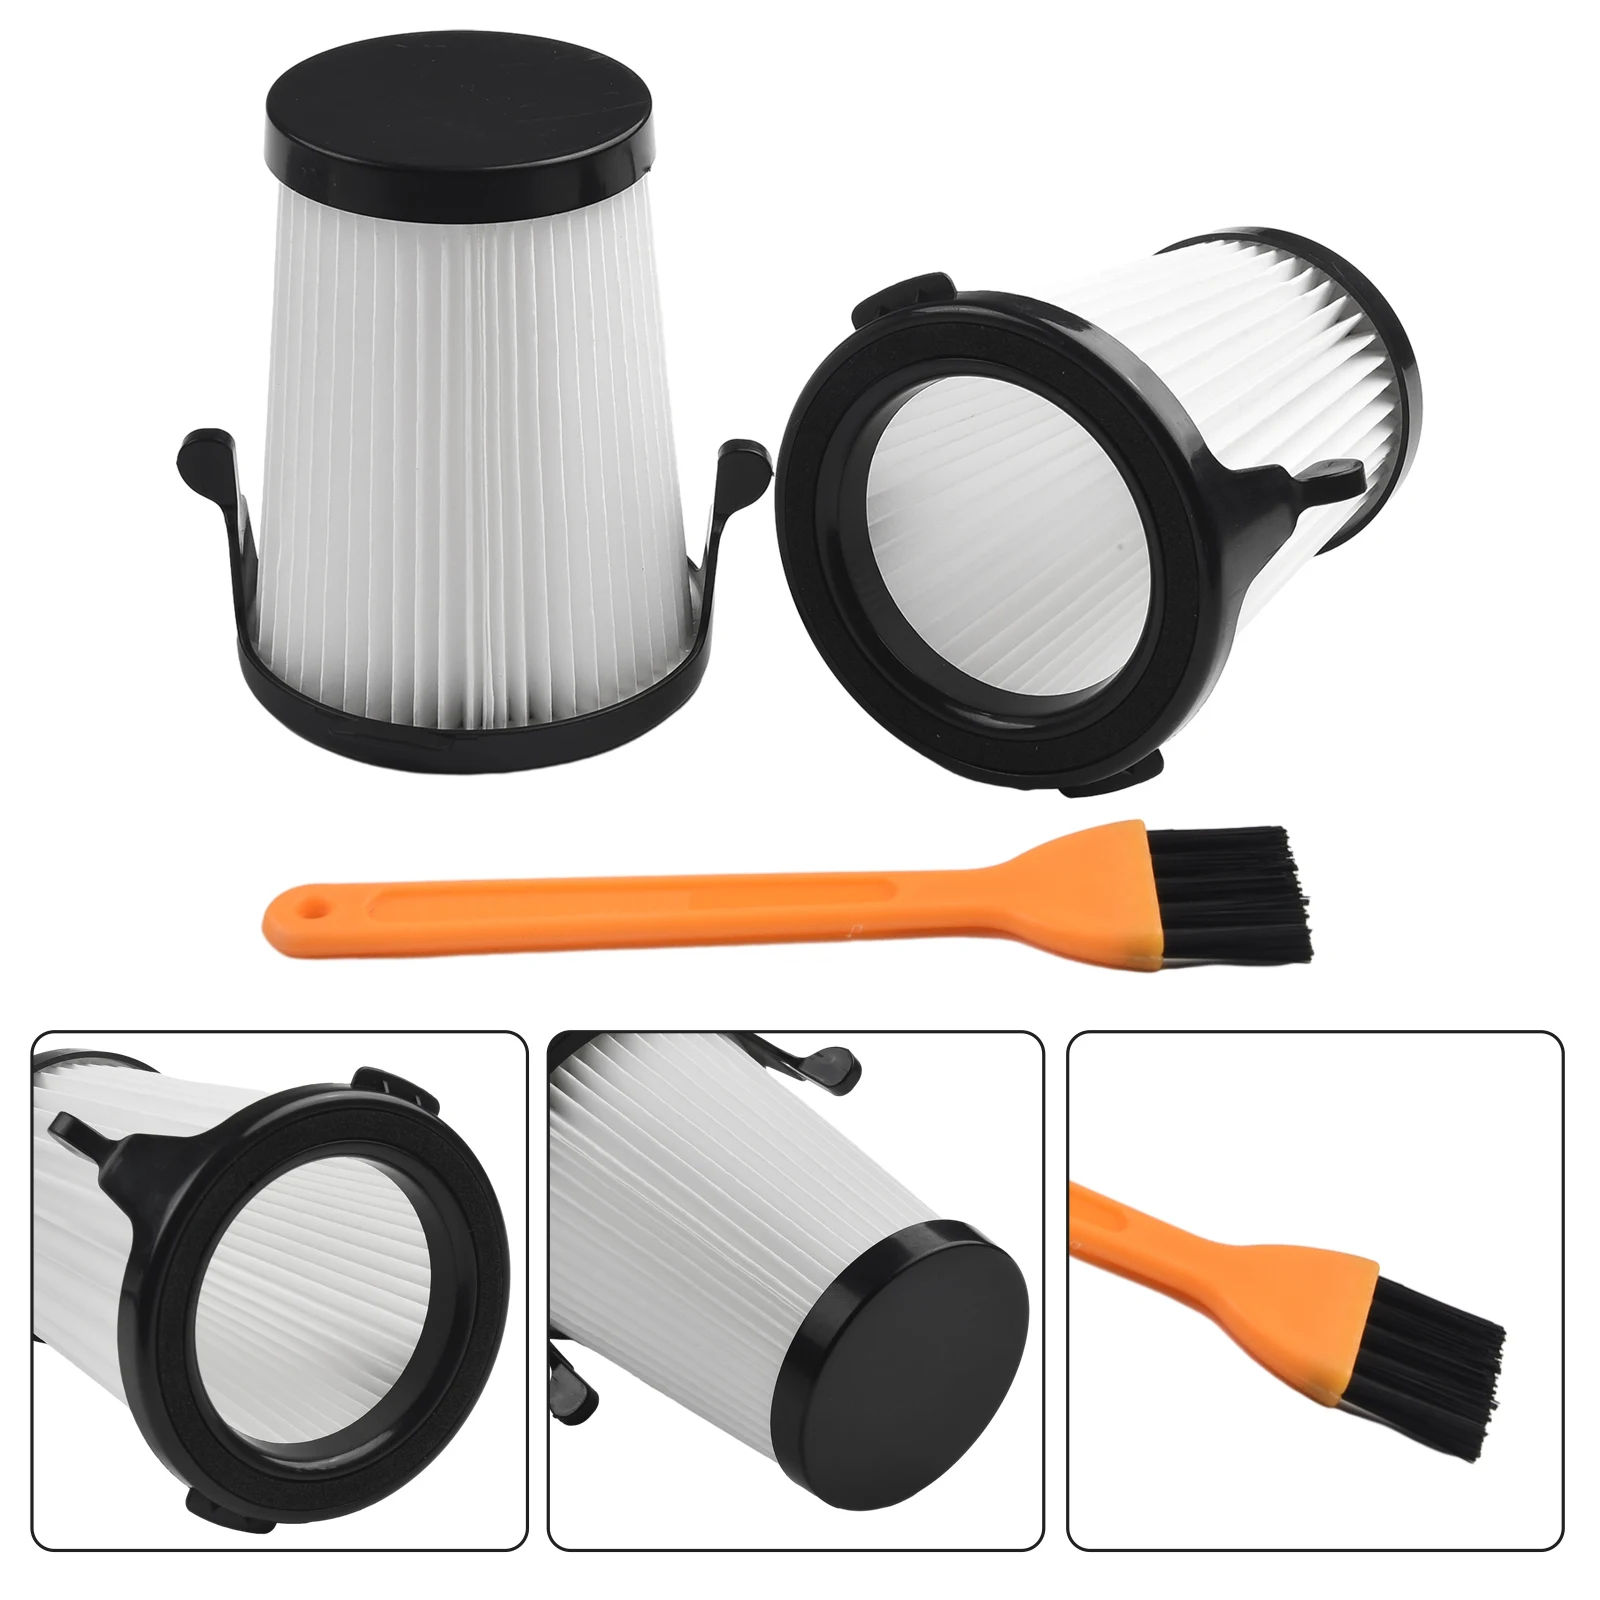 

Kit Combination Cleaning Brush Replacement Vacuum Filter #49-90-1950 0850-20 2pcs Brand New Compact For Milwaukee